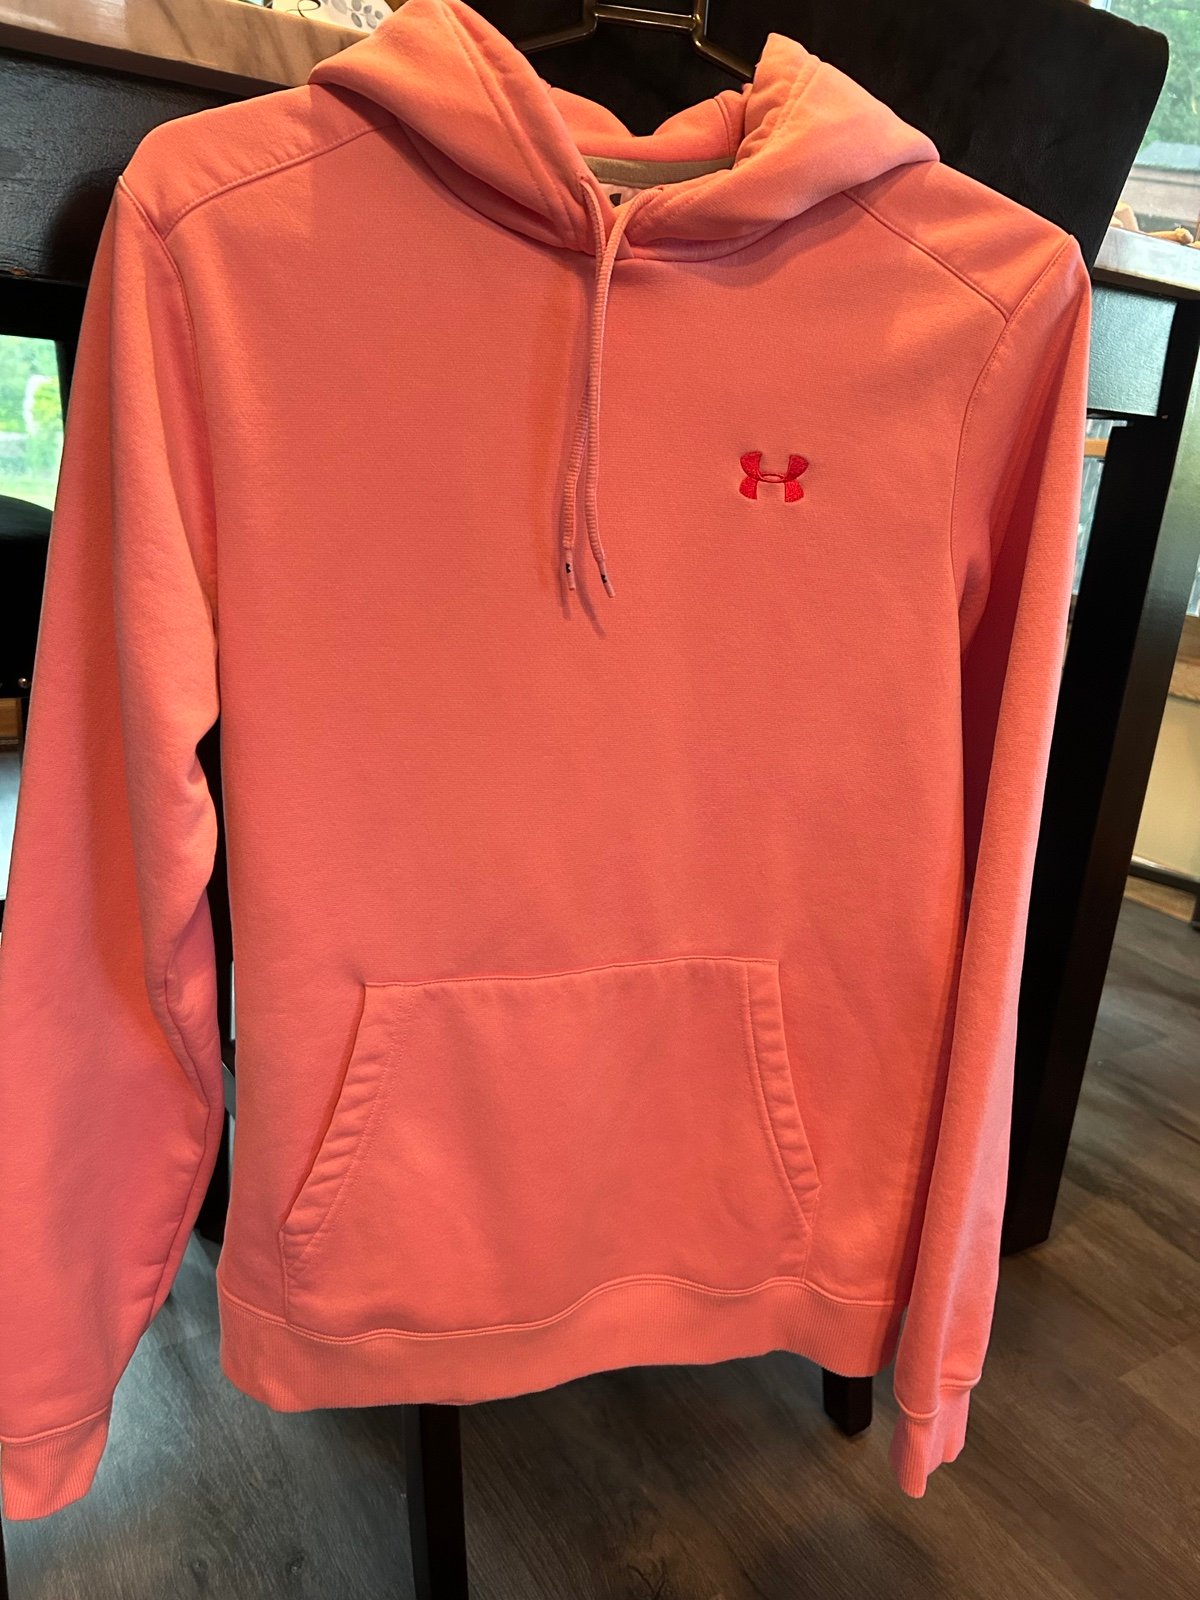 where to buy  Under Armor hoodie S/M pink luaP2D5n1 just buy it